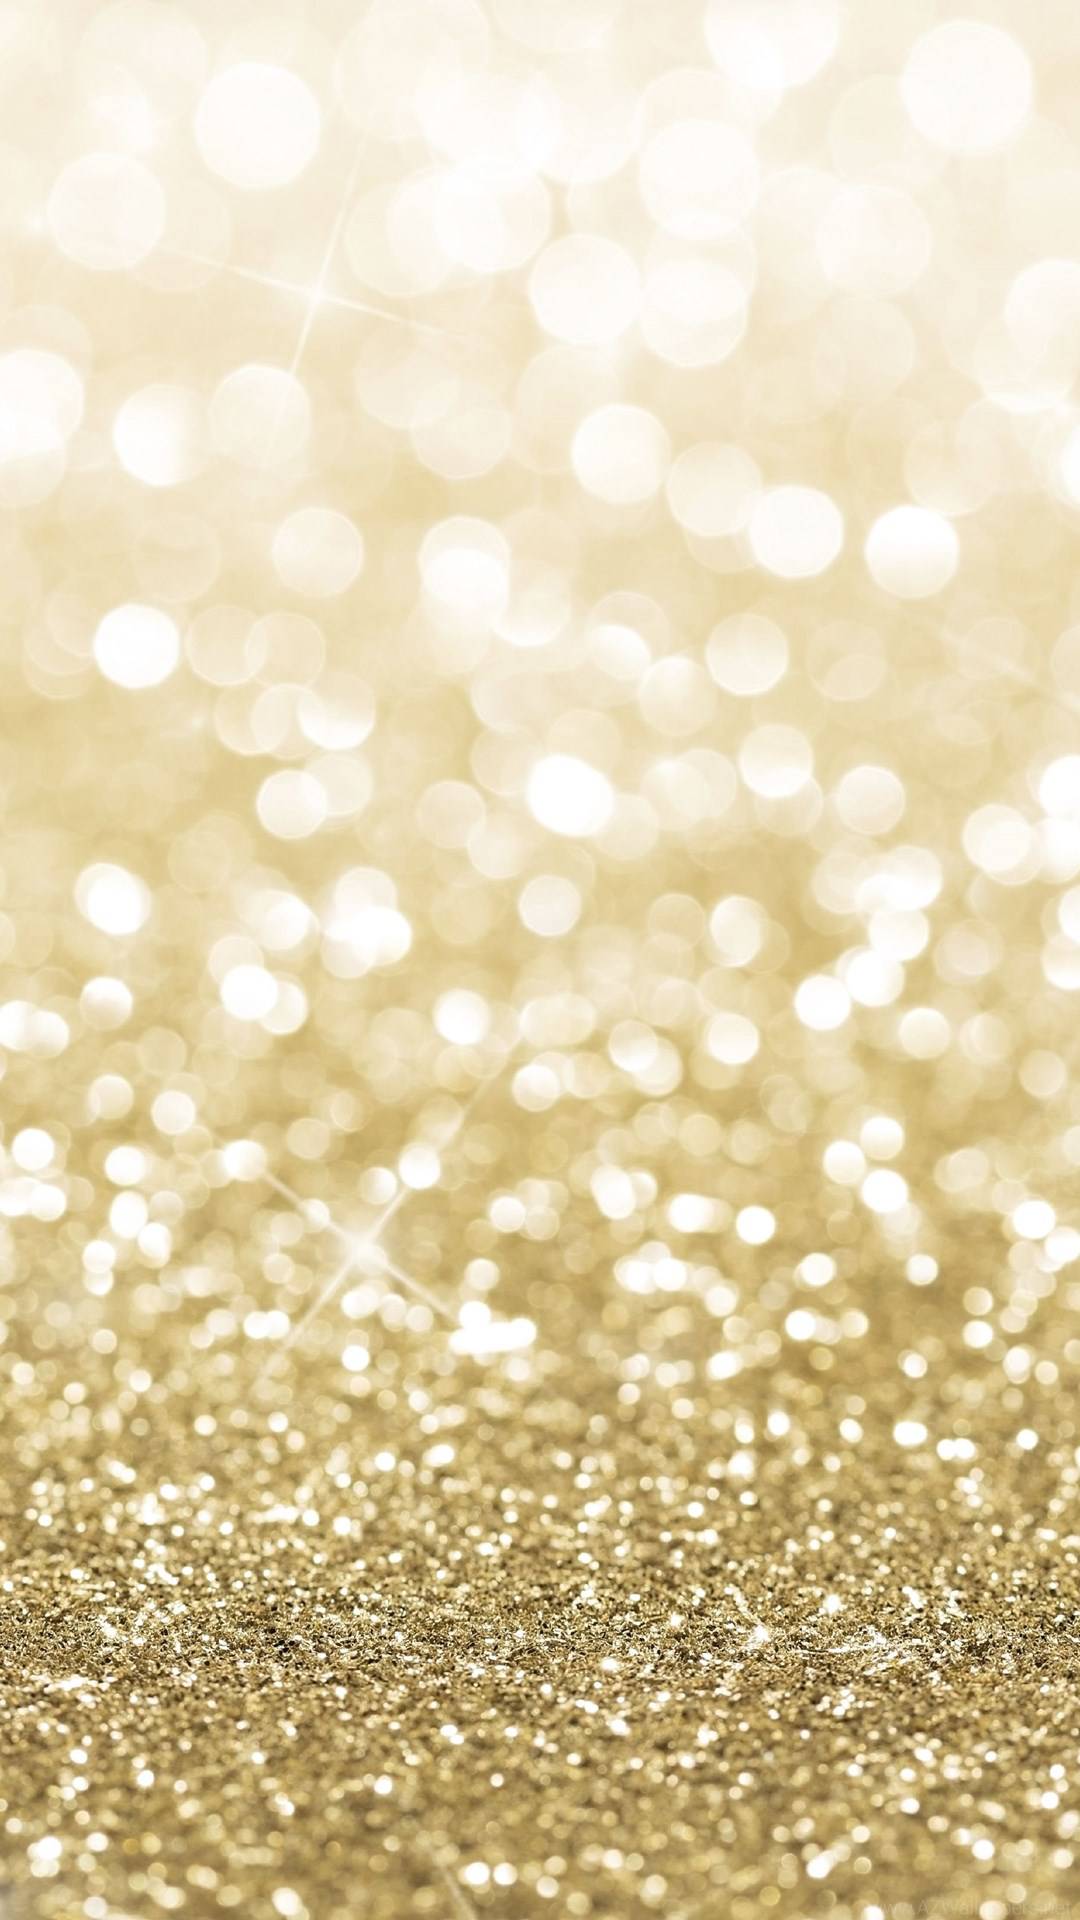 Yellow Glitter Wallpapers - Top Free Yellow Glitter Backgrounds ...